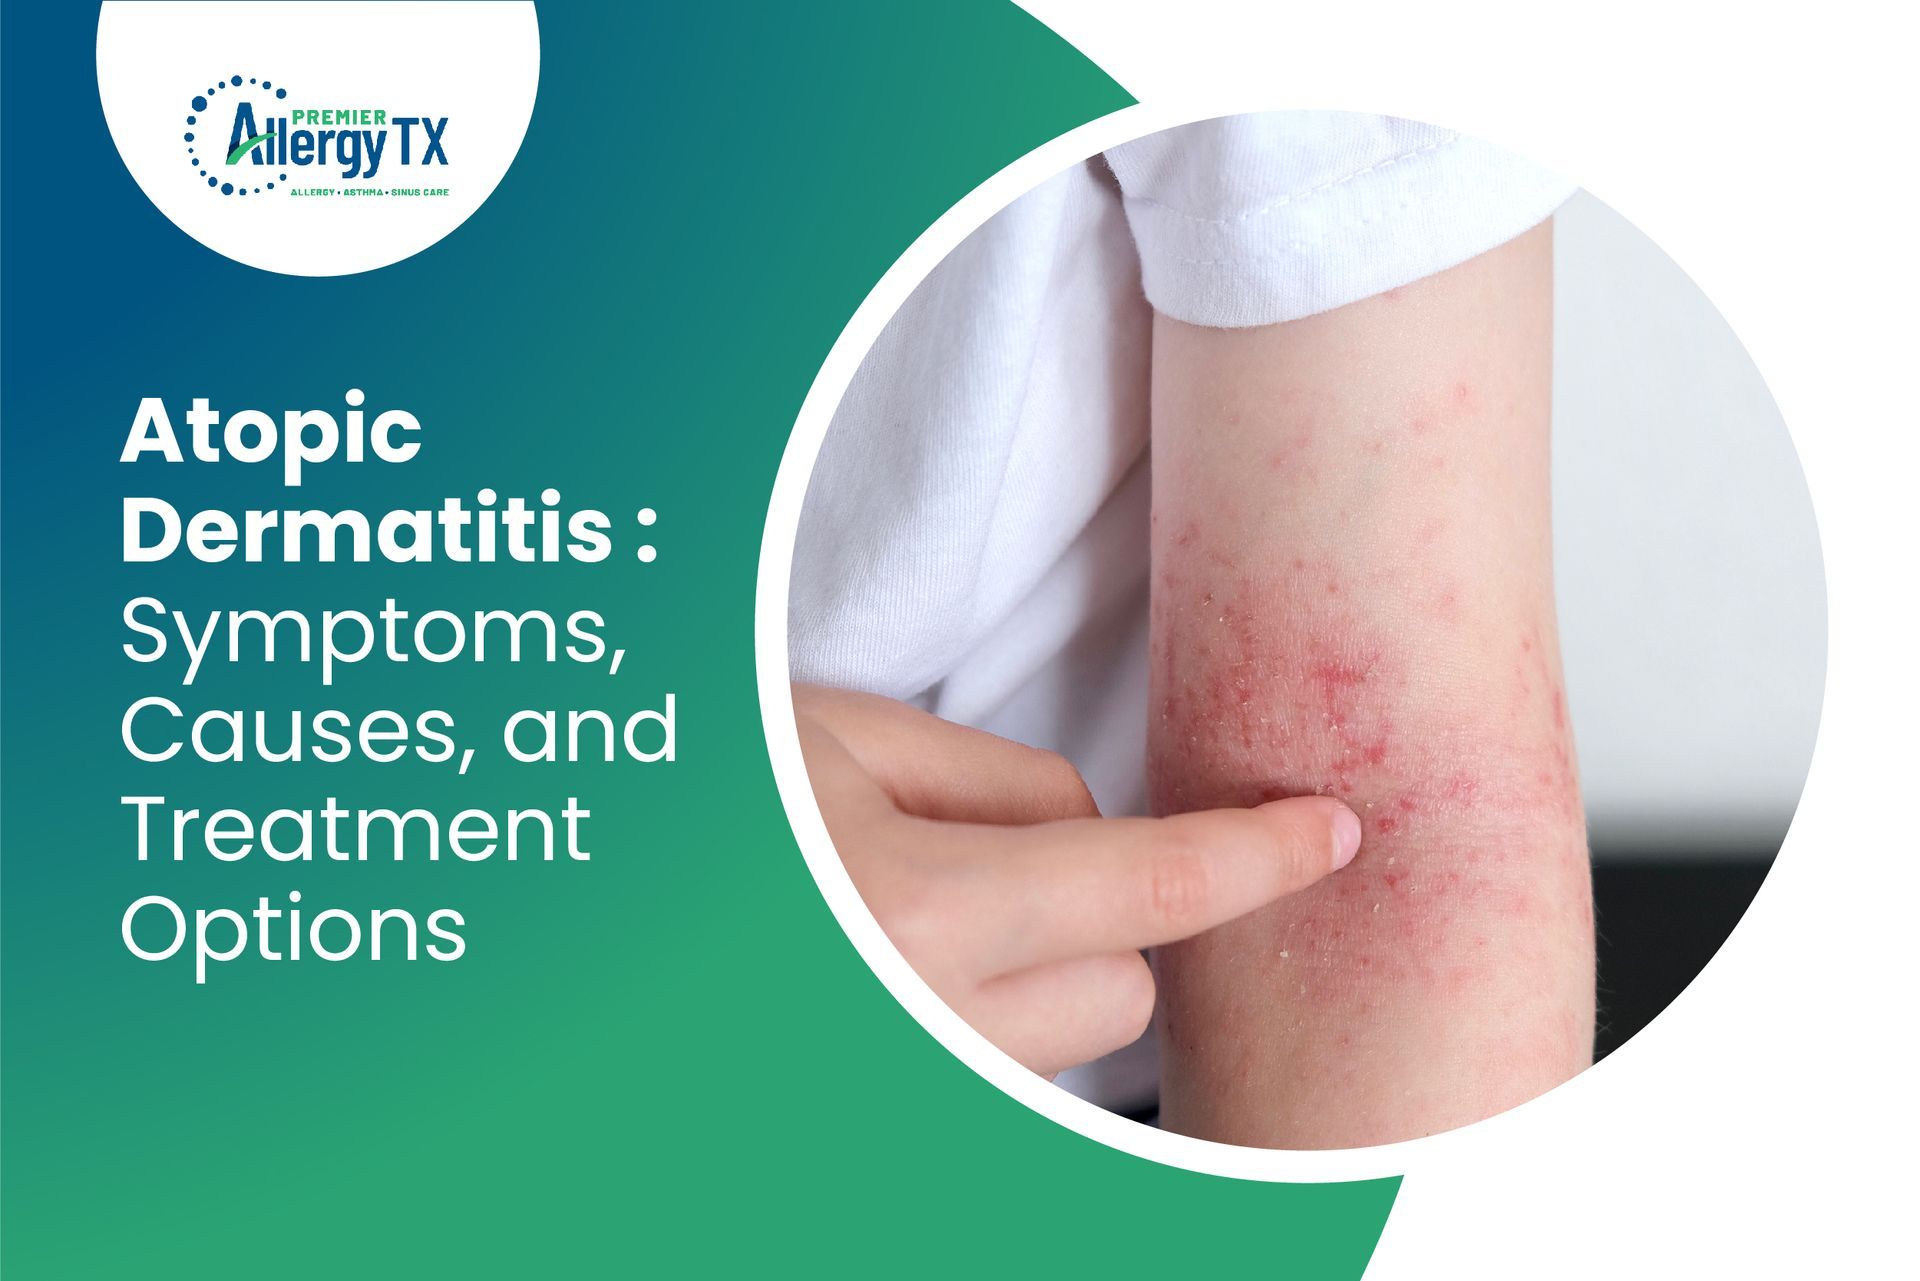 Atopic Dermatitis: Symptoms, Causes, and Treatment Options